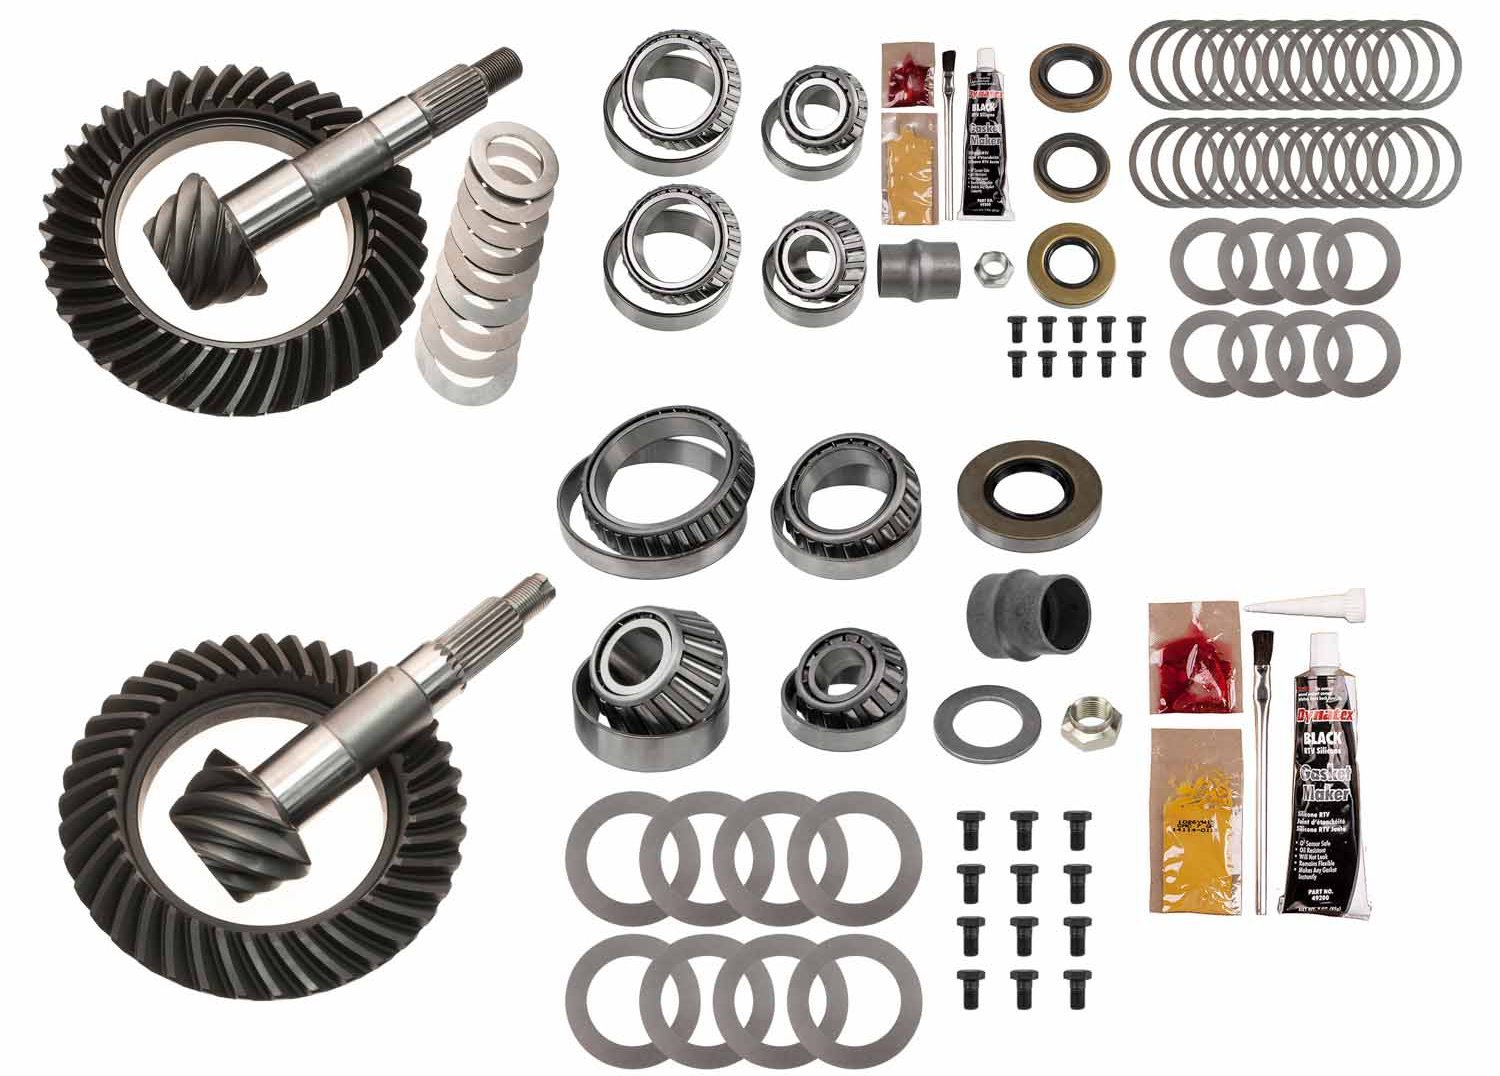 Complete Front and Rear Ring and Pinion Kit 1995-2002 Toyota Tacoma, 1996-2002 Toyota 4Runner - 5.29 Ratio